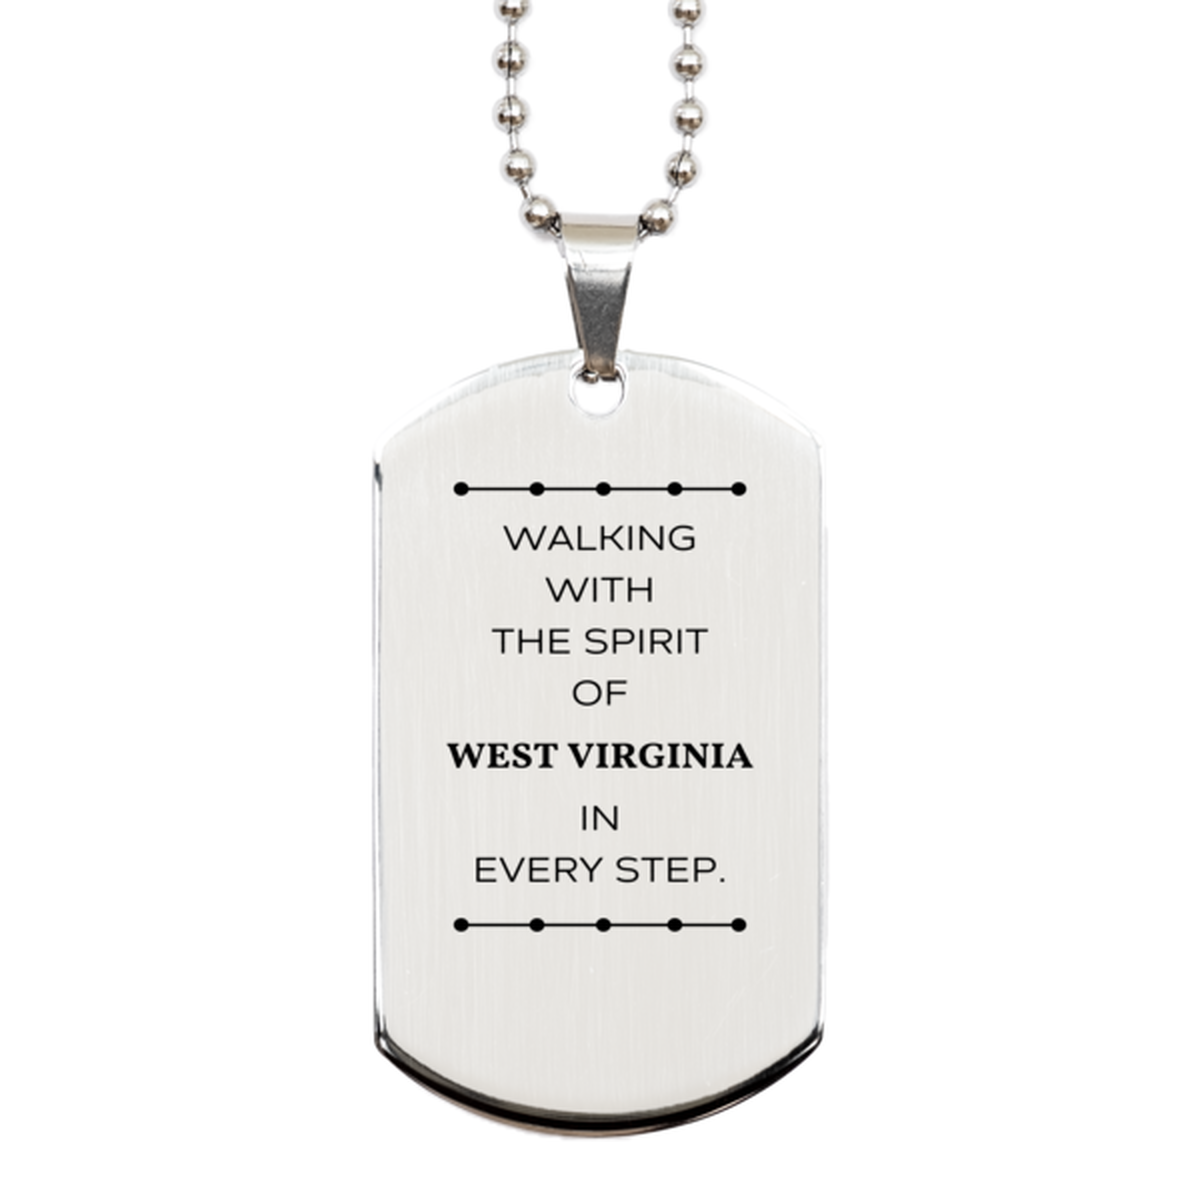 West Virginia Gifts, Walking with the spirit, Love West Virginia Birthday Christmas Silver Dog Tag For West Virginia People, Men, Women, Friends